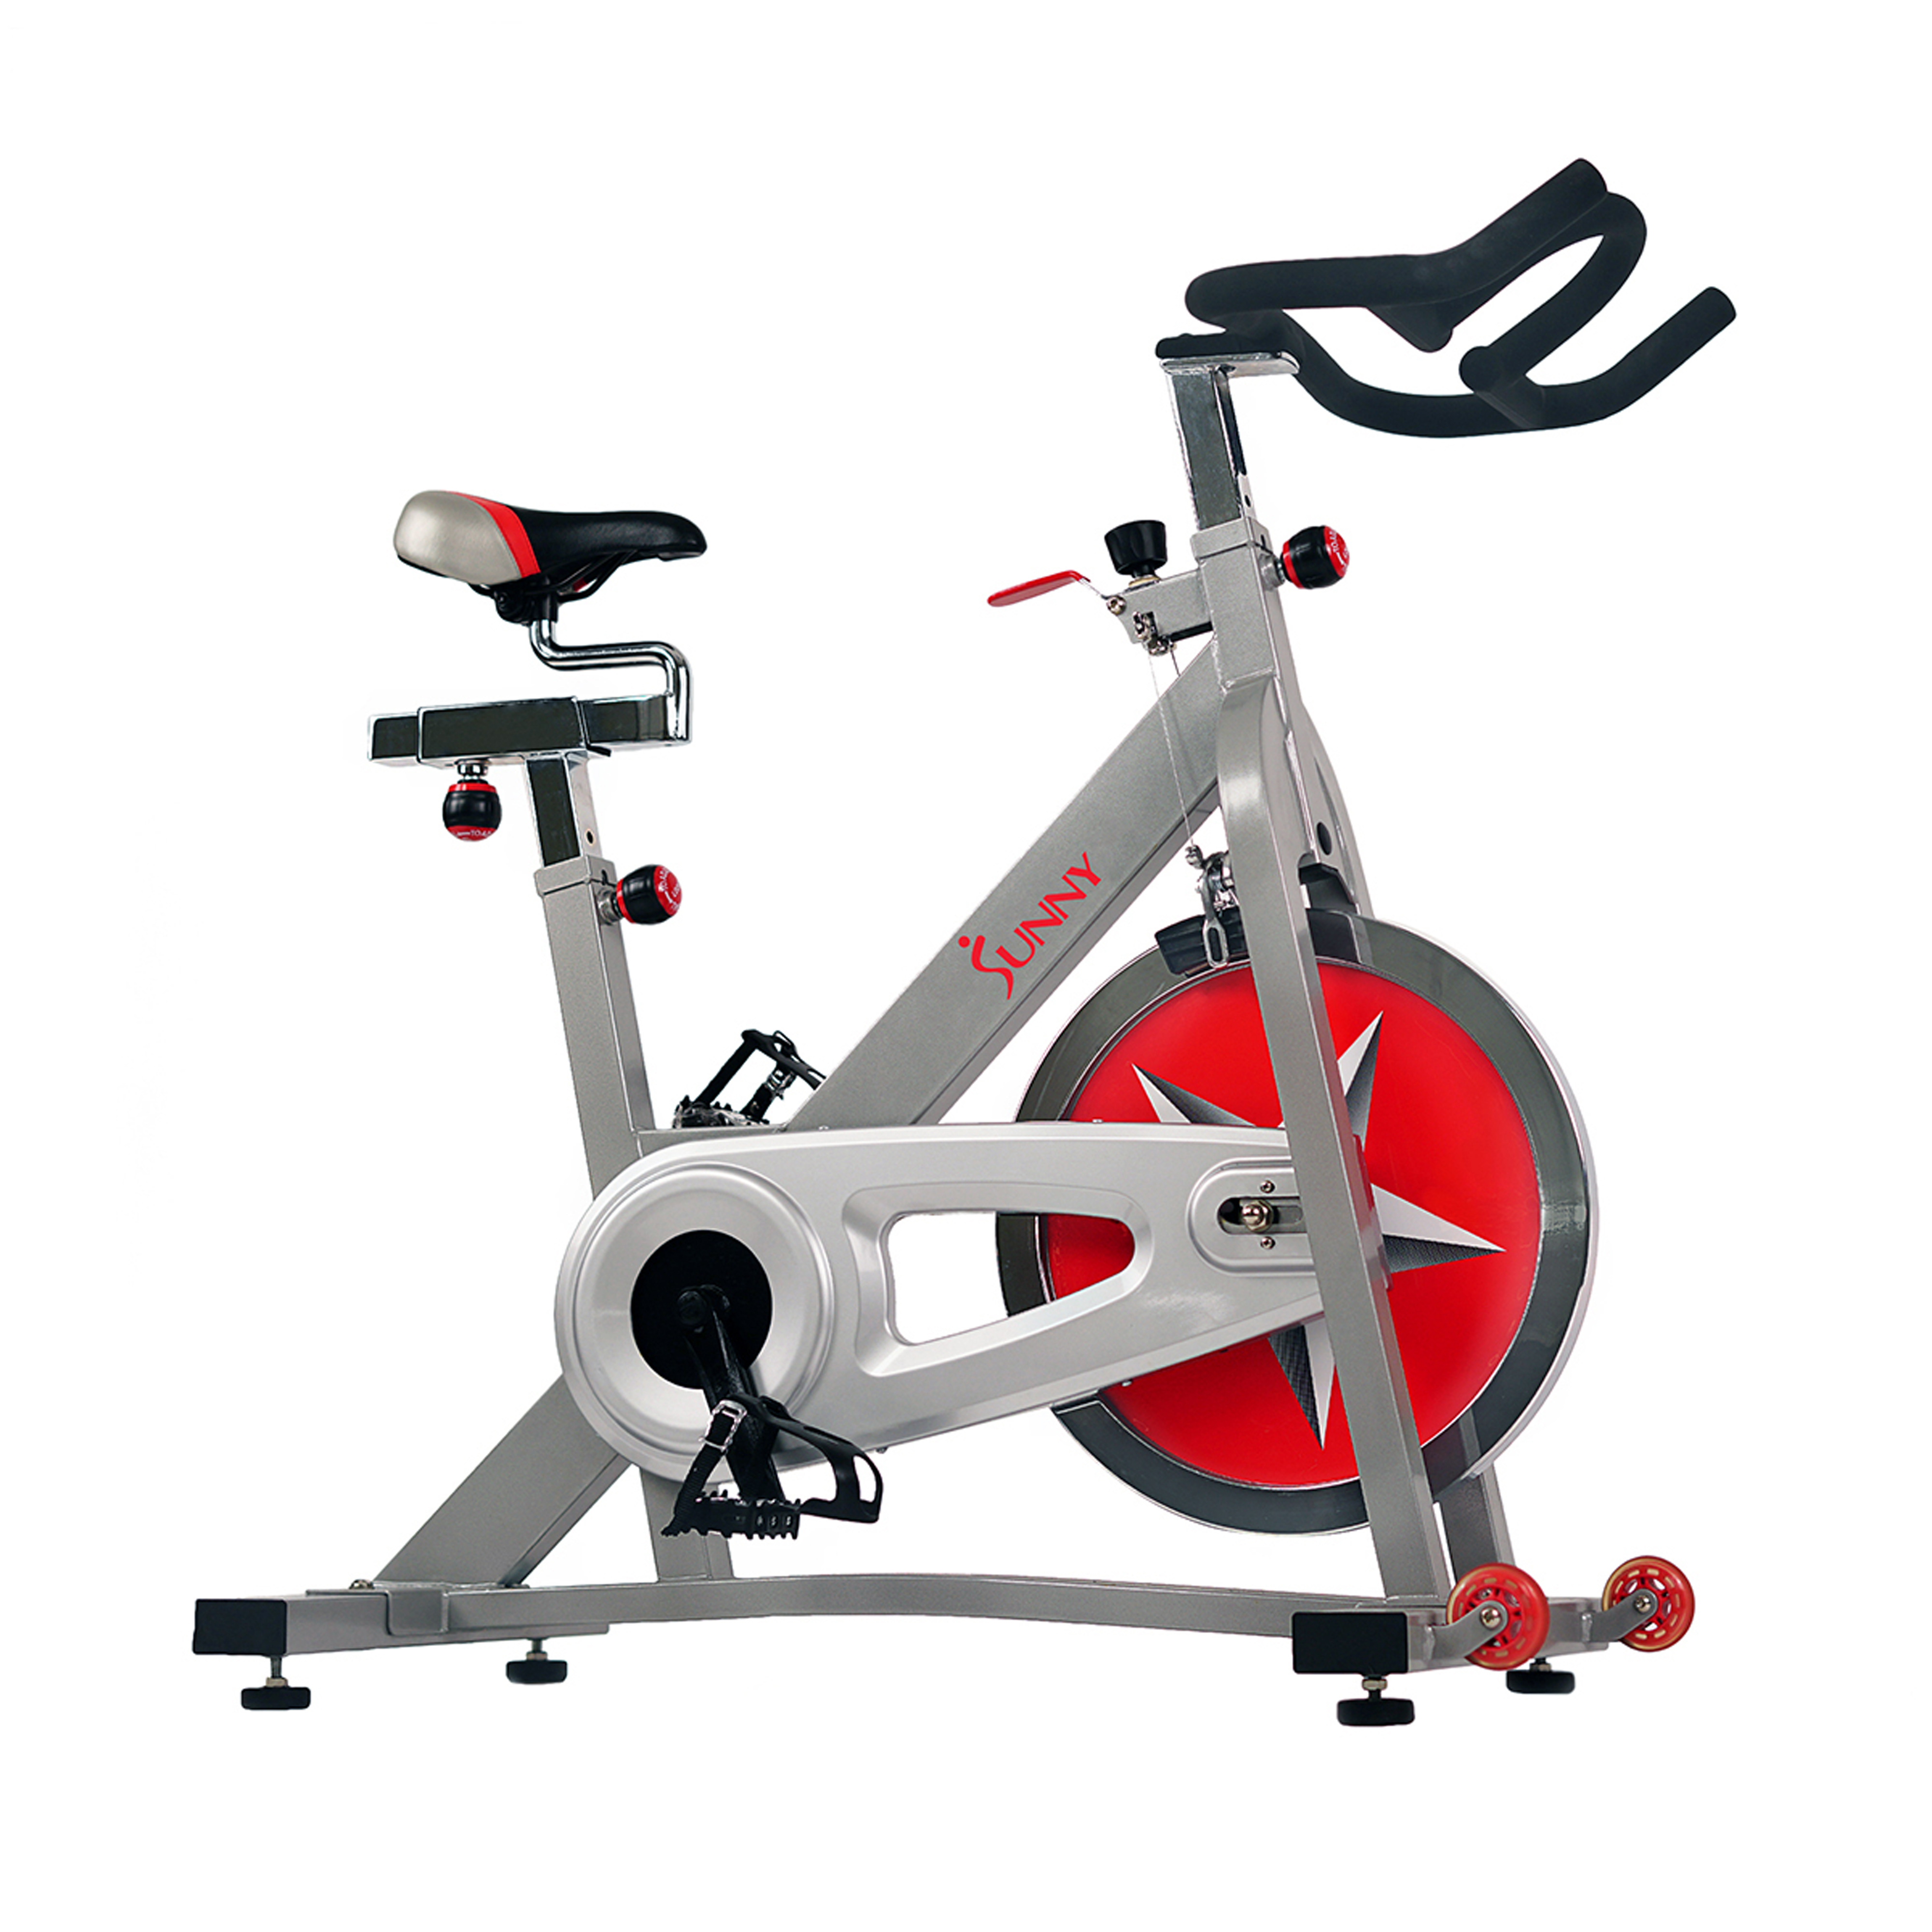 Sunny Health & Fitness Stationary Chain Drive 40 lb Flywheel Pro Indoor Cycling Exercise Bike Trainer, Workout Machine, SF-B901 - image 3 of 9